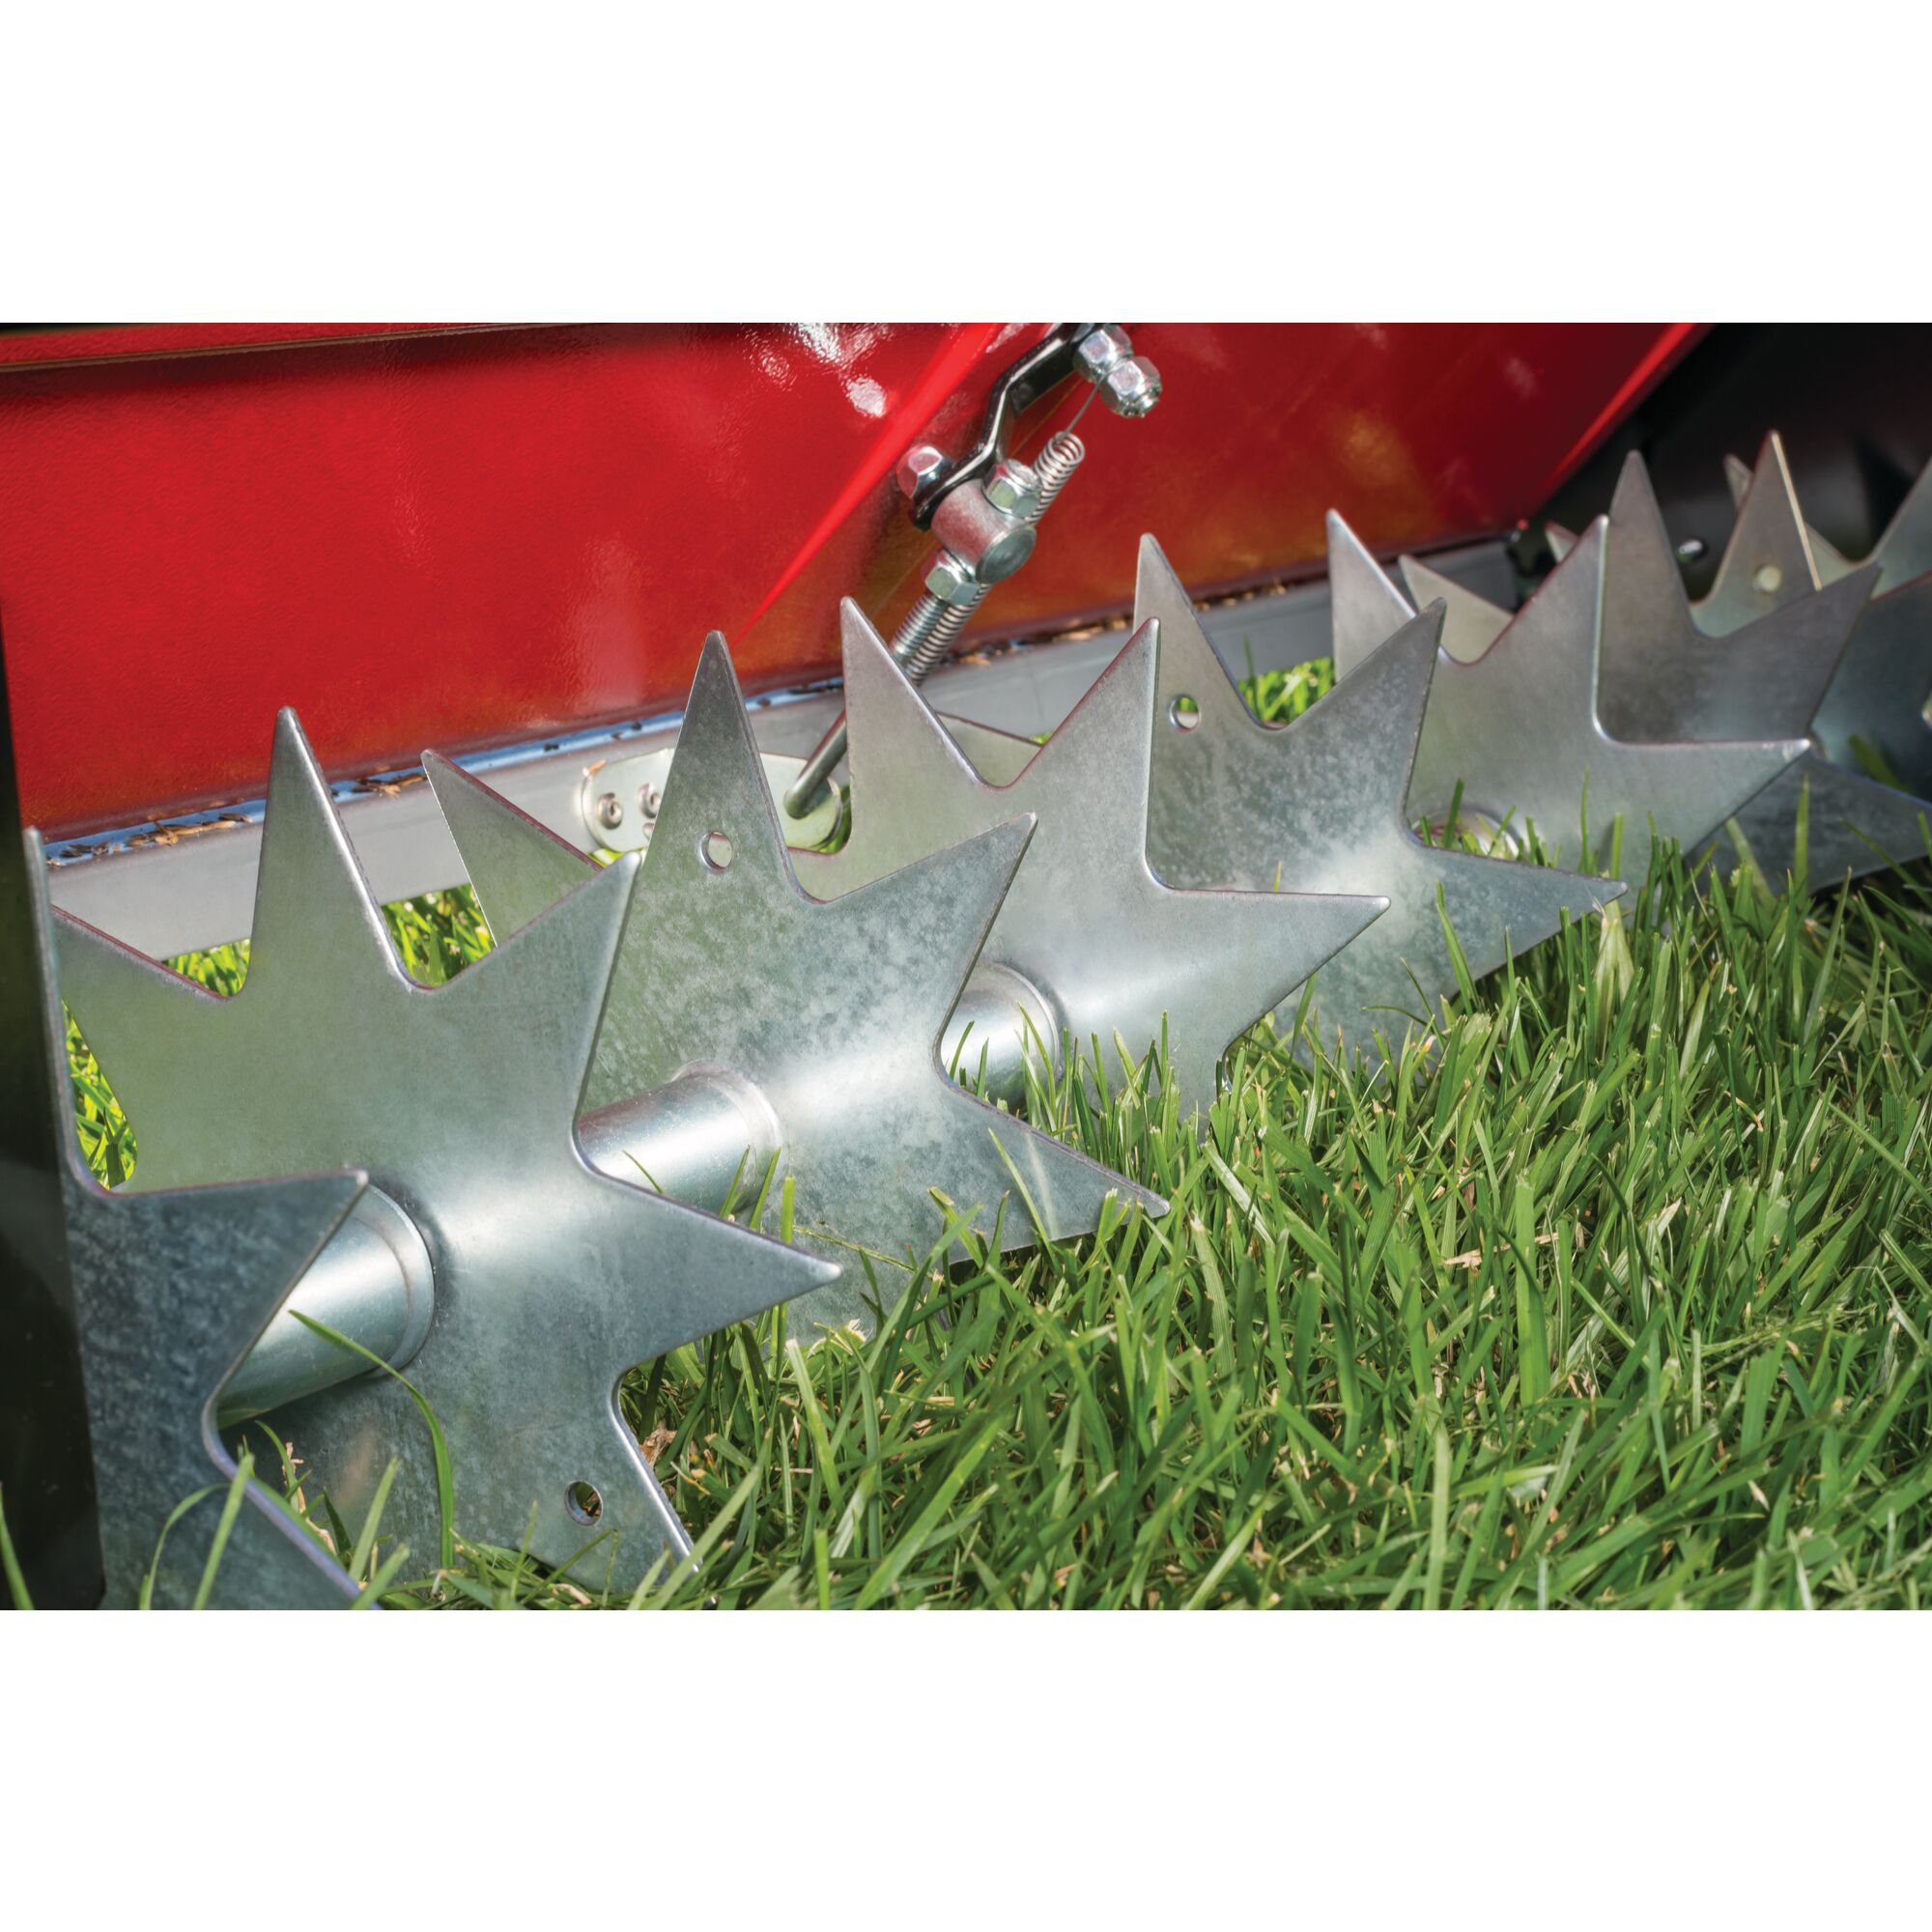 Easily permeates soil feature of 100 pounds aerator drop spreader combo.